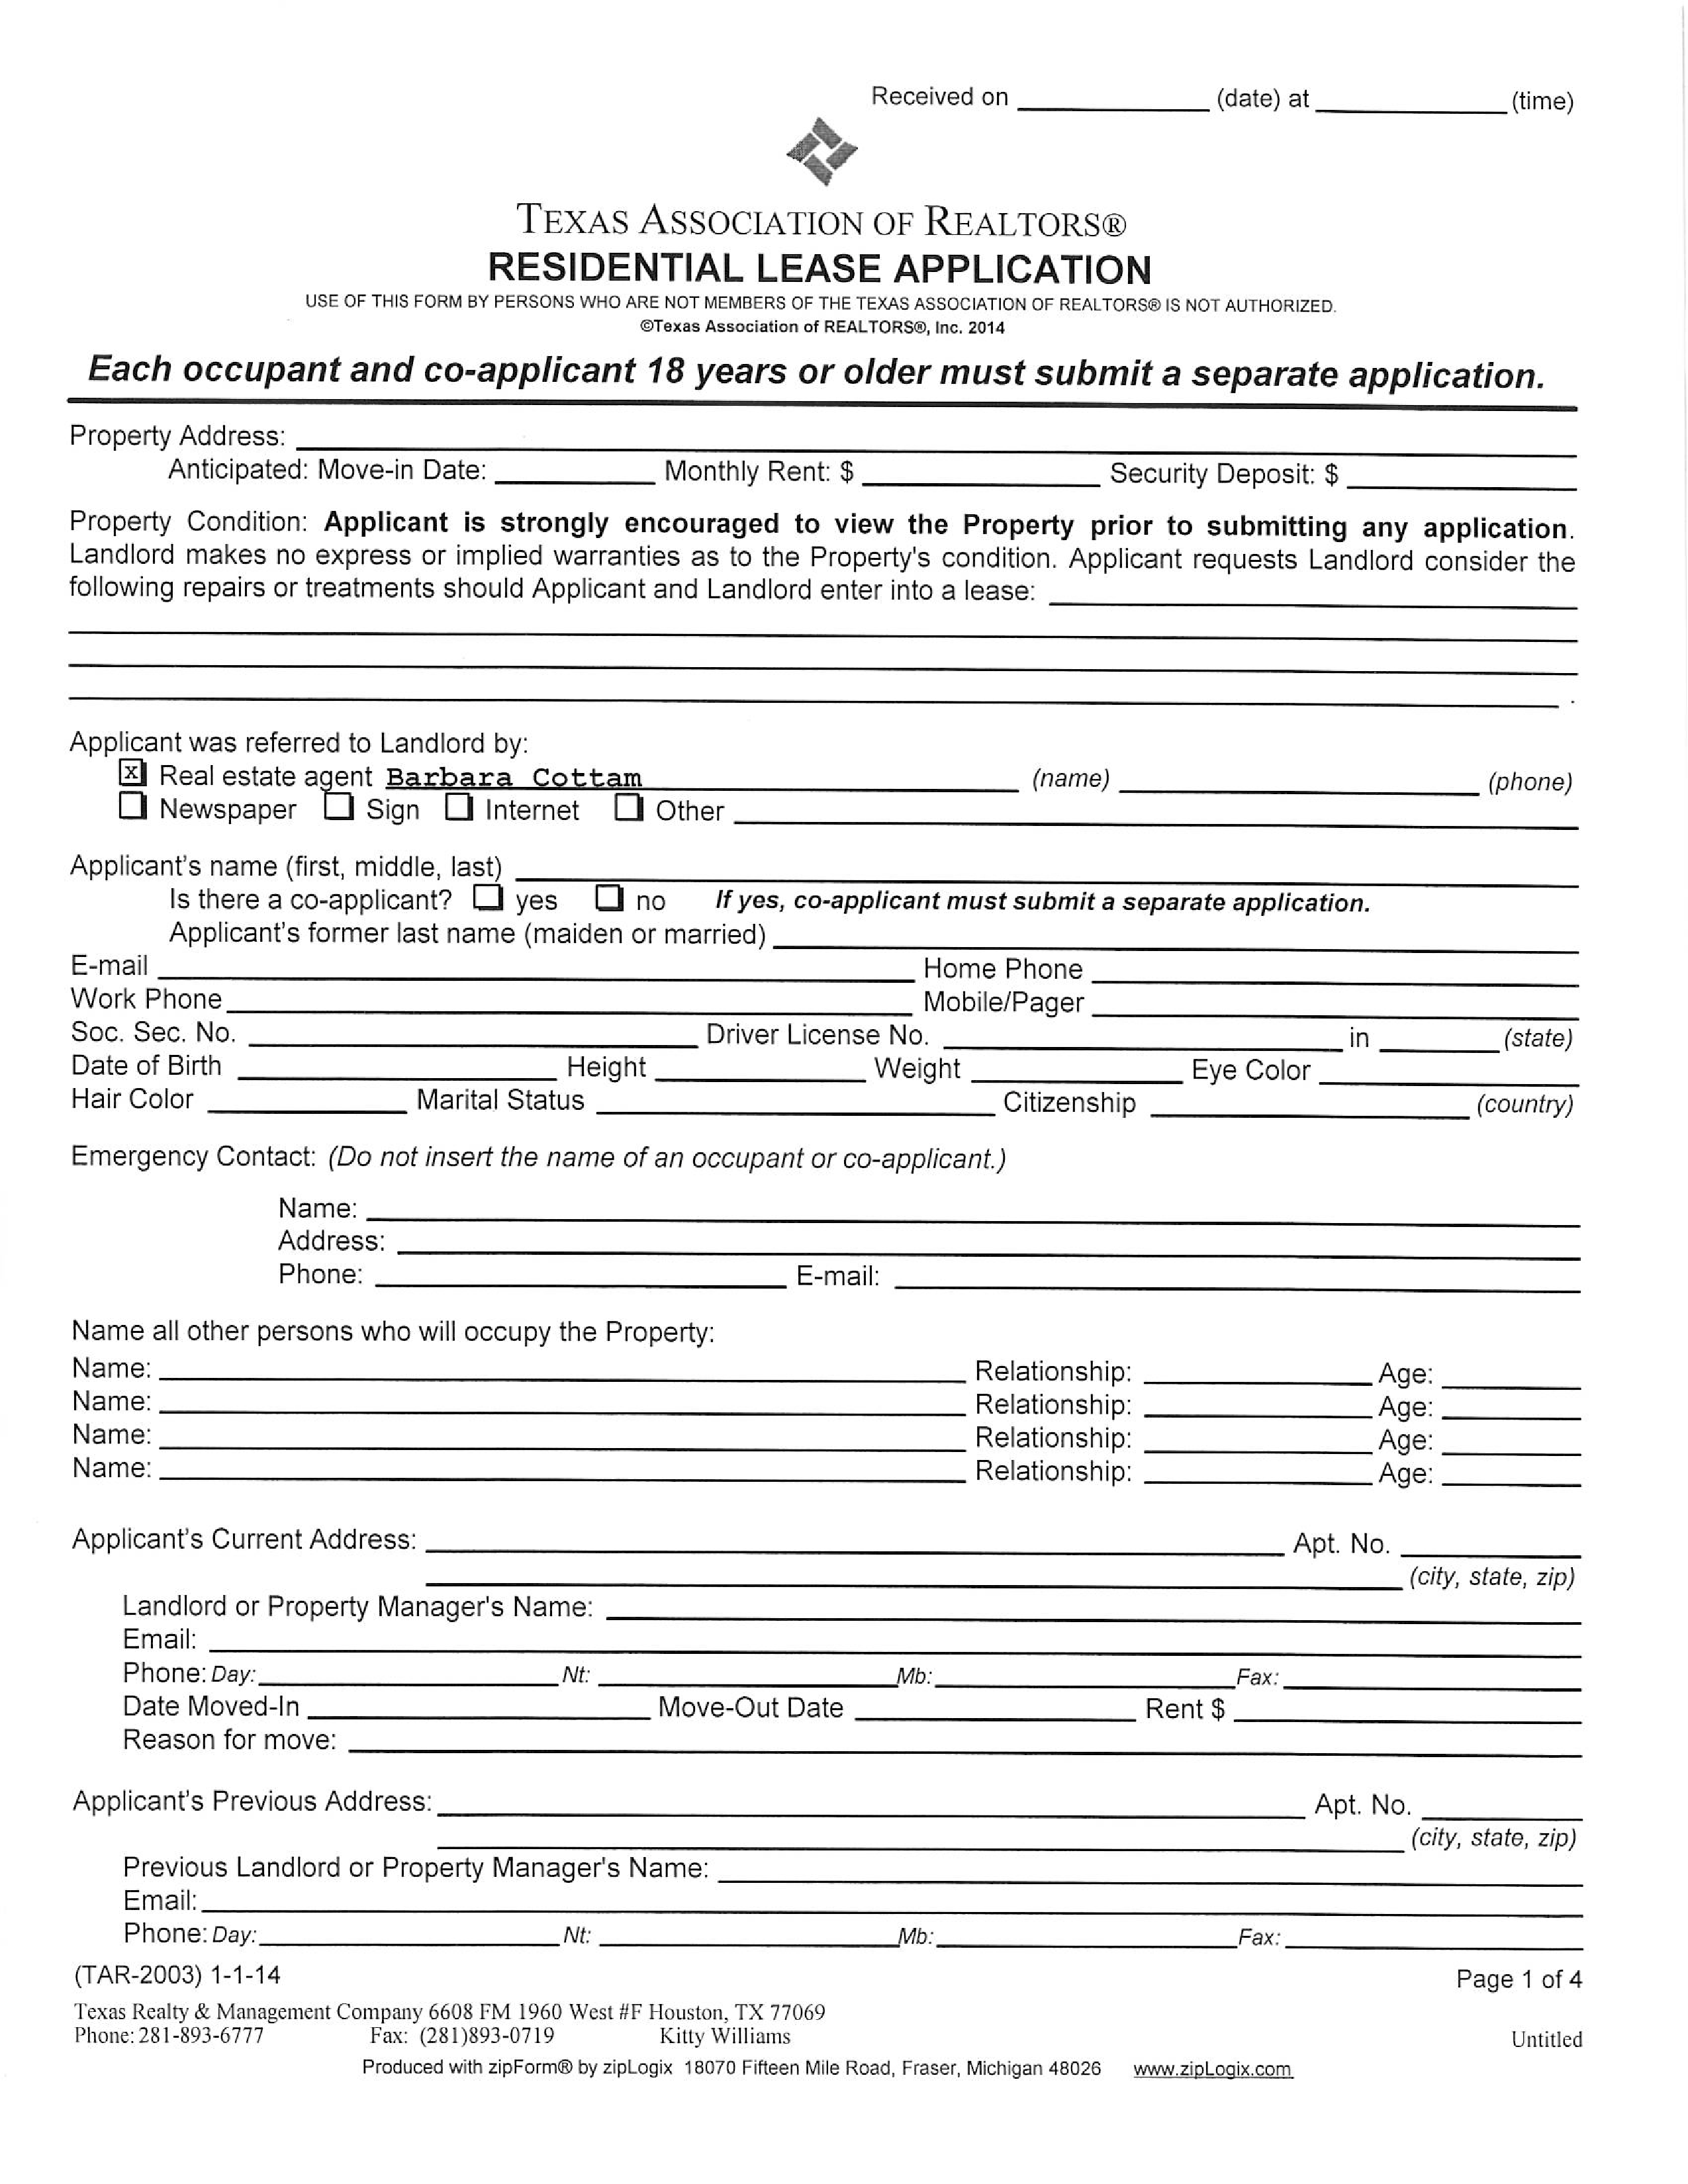 Residential Lease Application Form by Realtor 模板